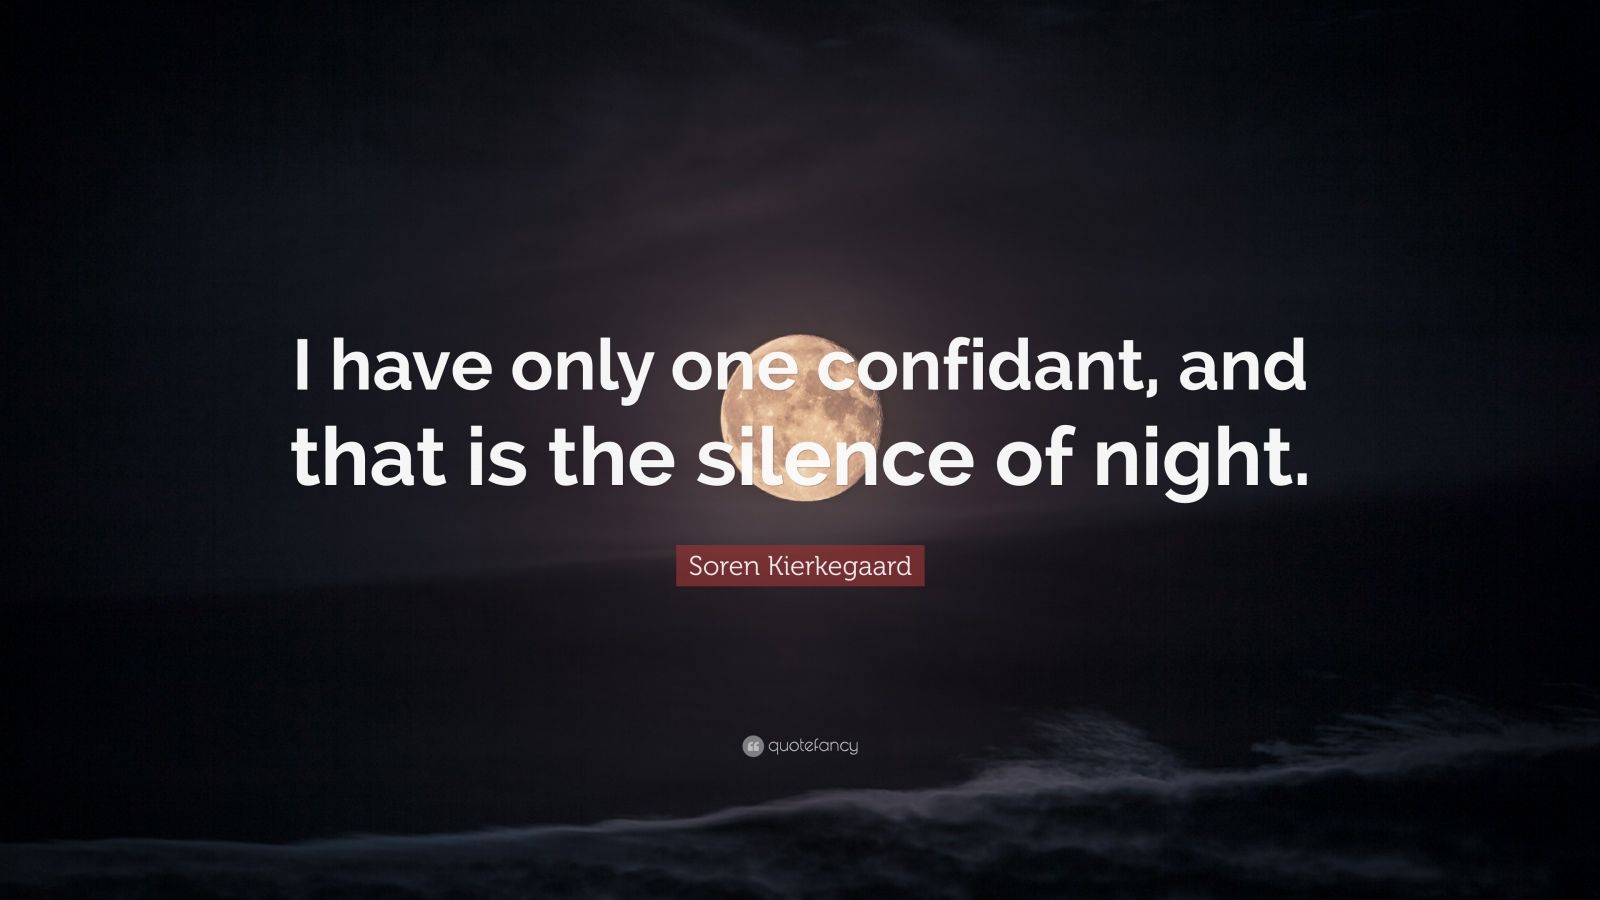 soren kierkegaard quote: "i have only one confidant, and that is